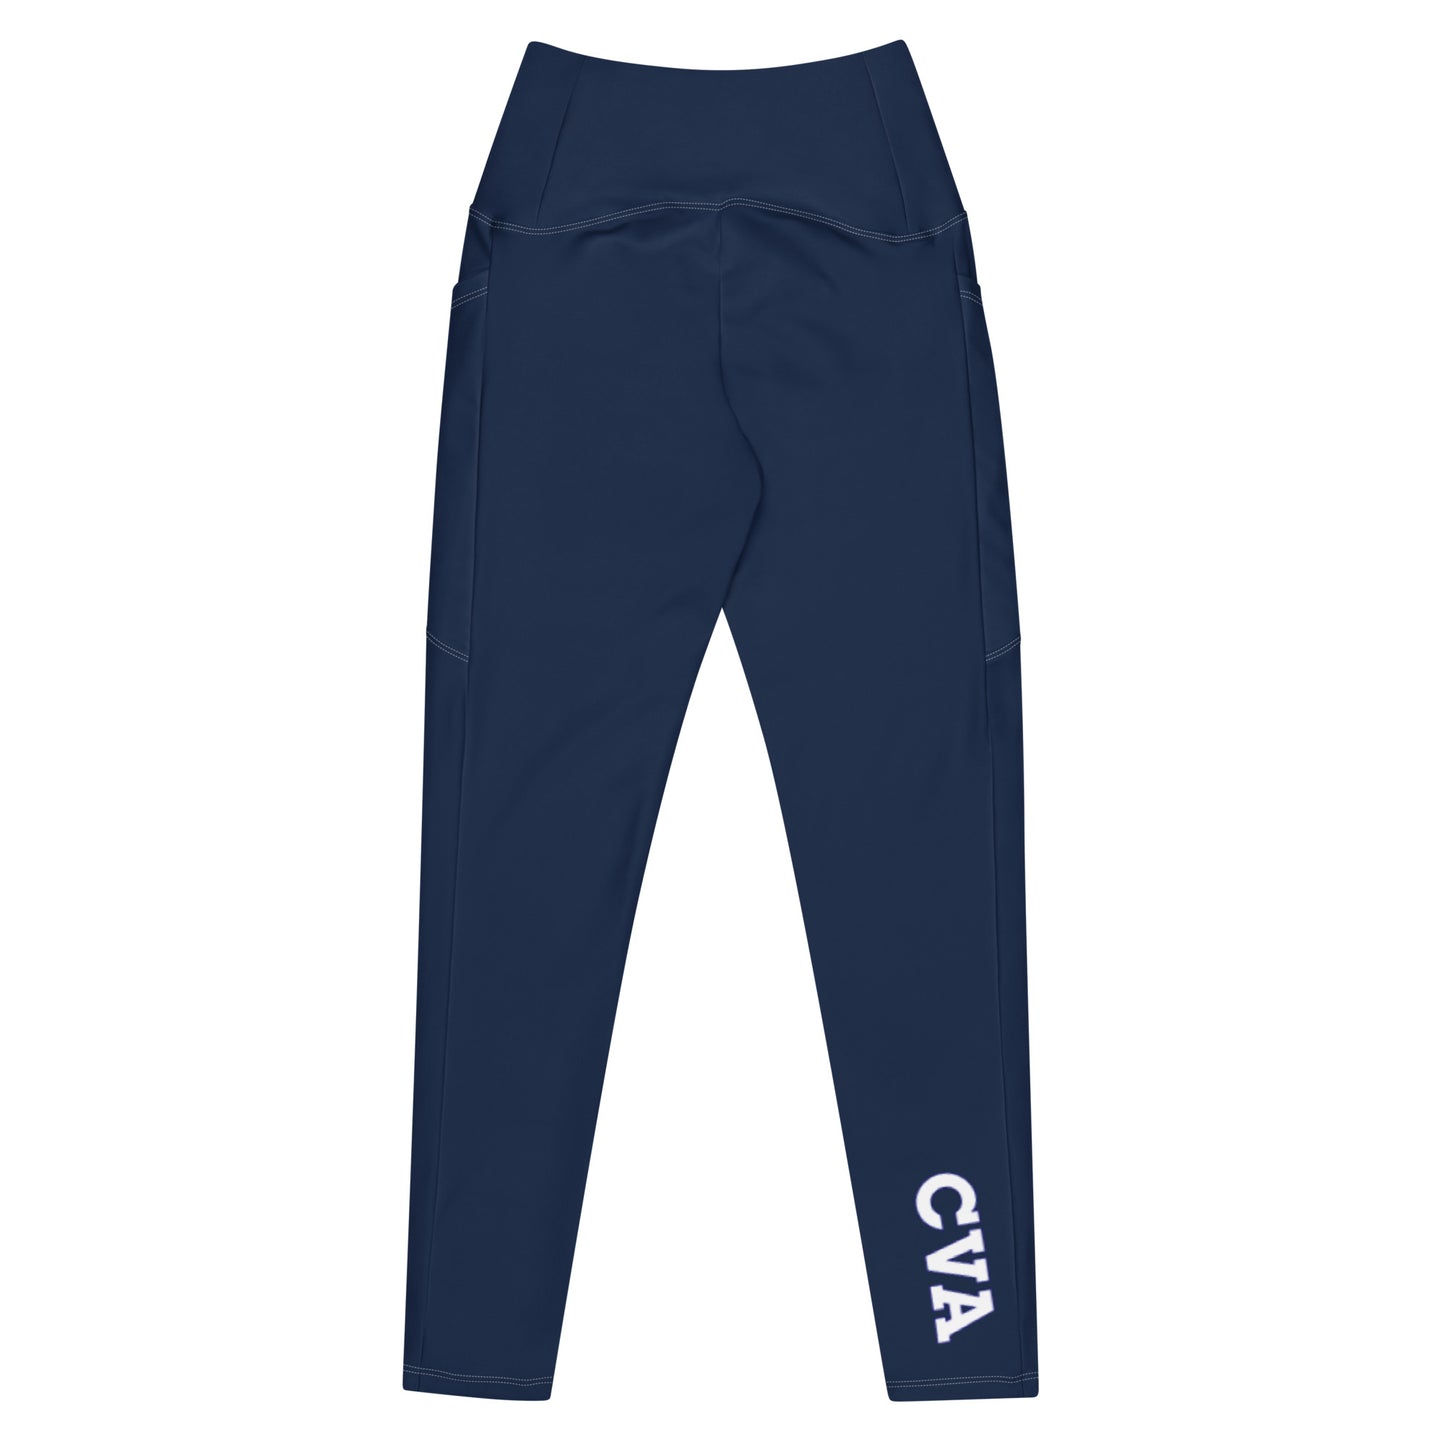 Crossover Leggings with Pockets - Navy